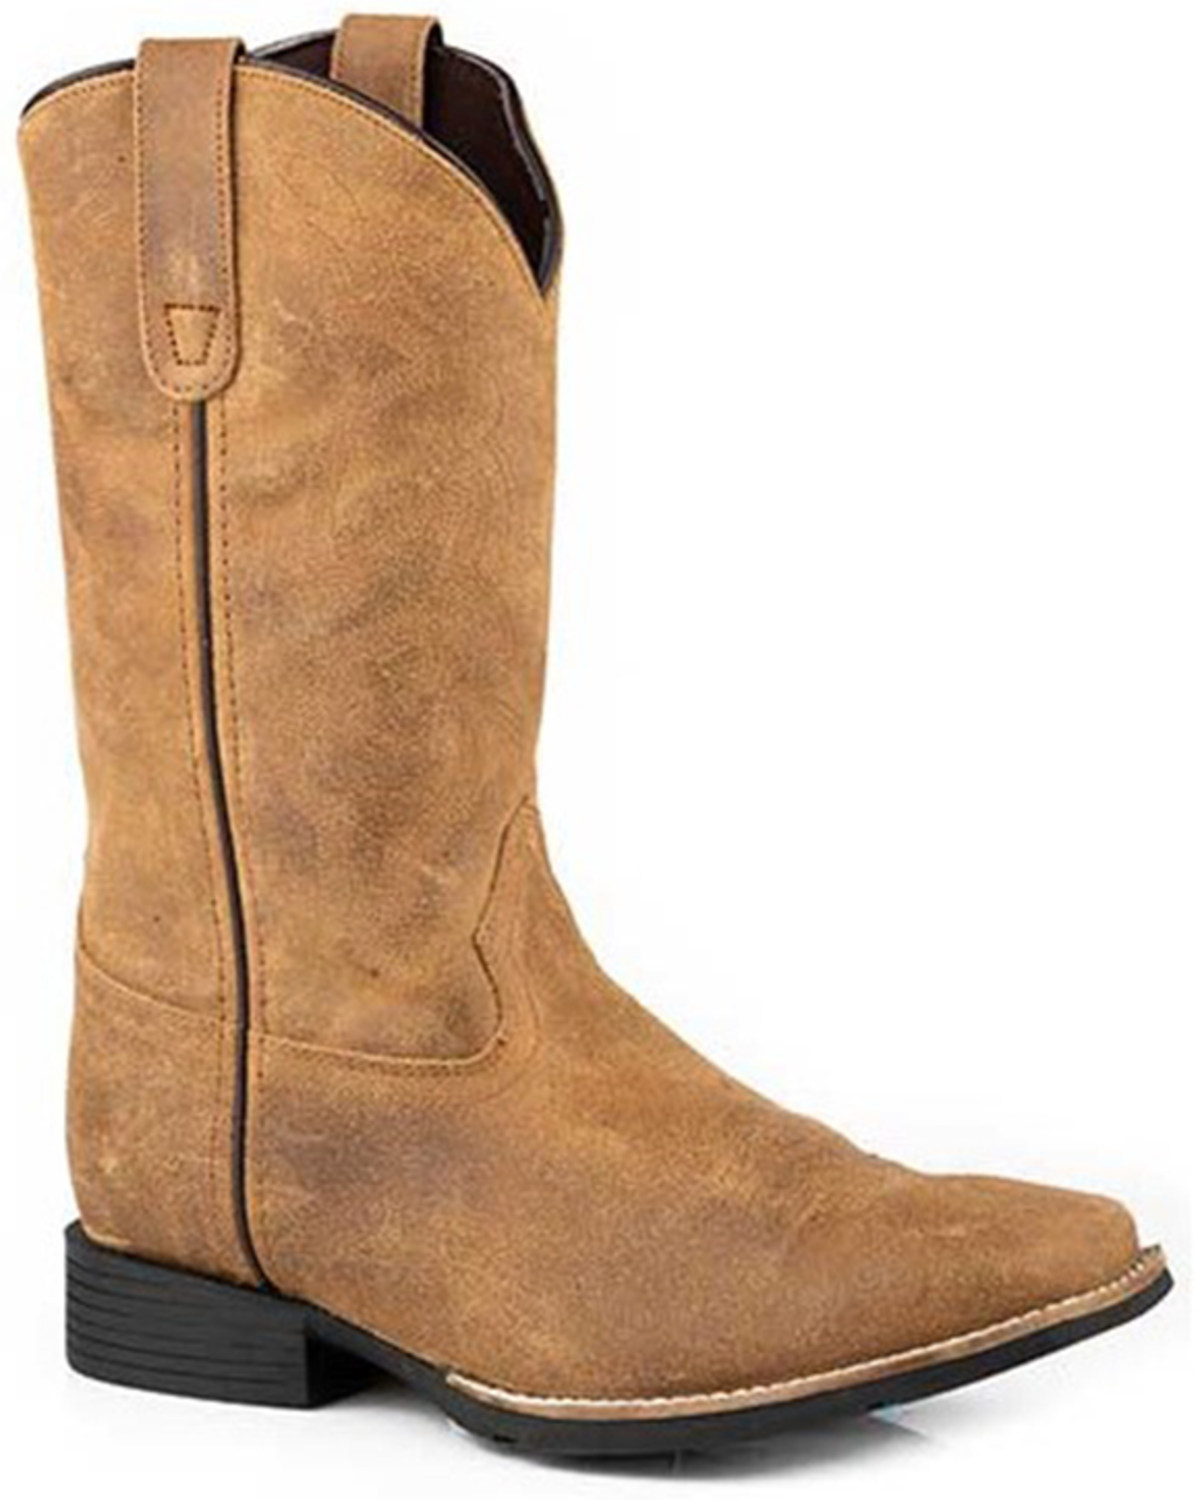 Roper Men's Monterey Roughout Western Boots - Square Toe